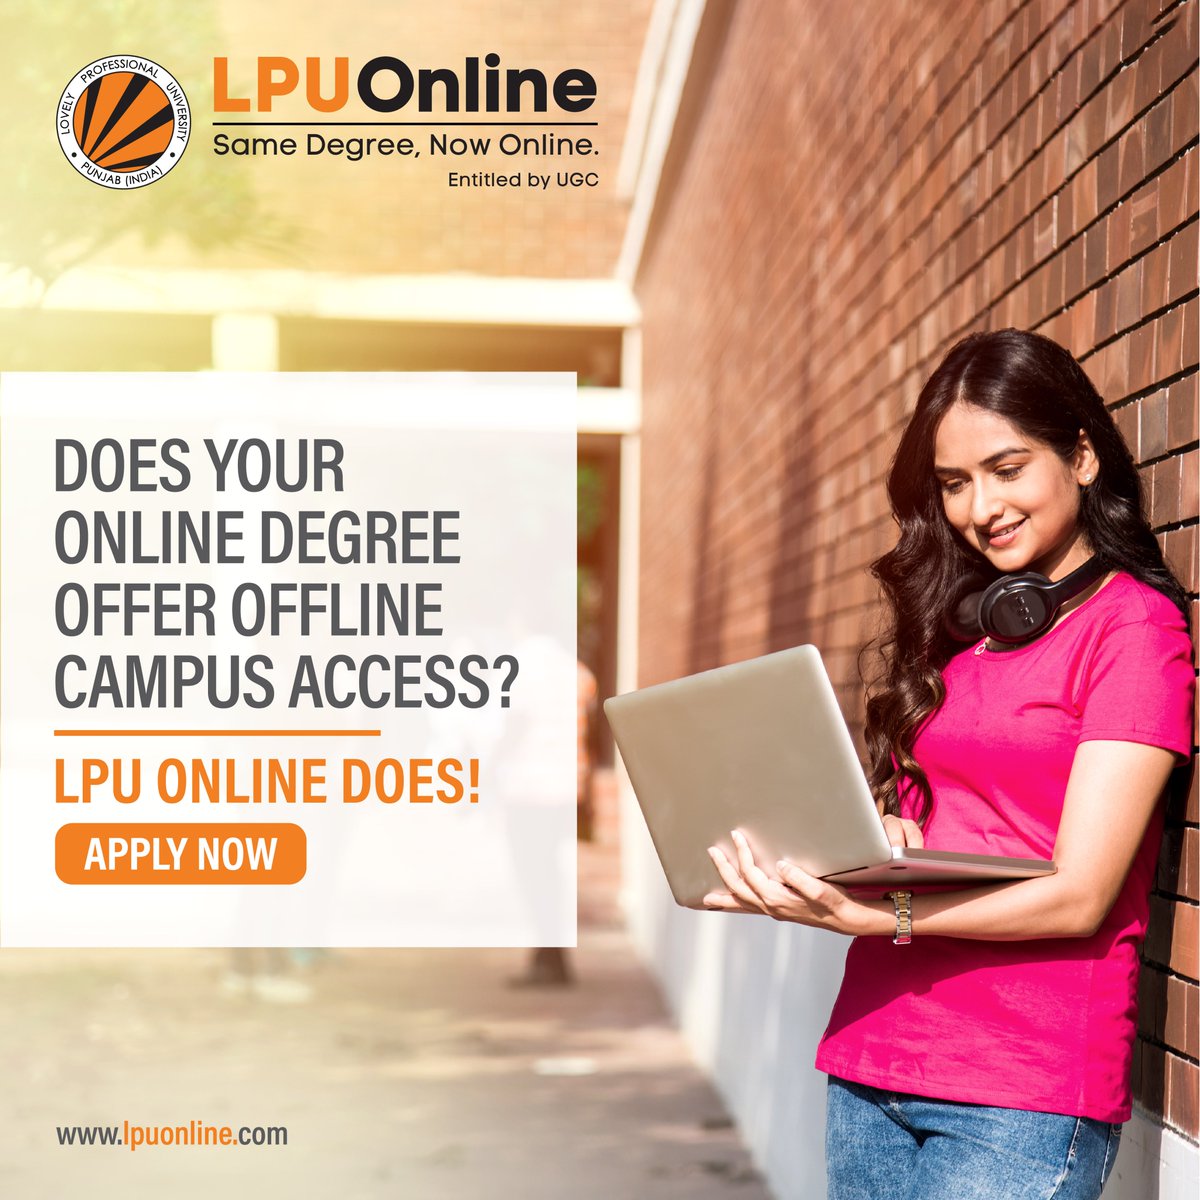 Imagine receiving the holistic environment and facilities of an offline campus in an #OnlineDegree.

Our students get equal opportunities to explore in LPU campus.
Apply for #LPUOnline programmes today.

#OnlineLearning #OnlineEducation #UGC #Degree #Undergraduate #PostGraduate